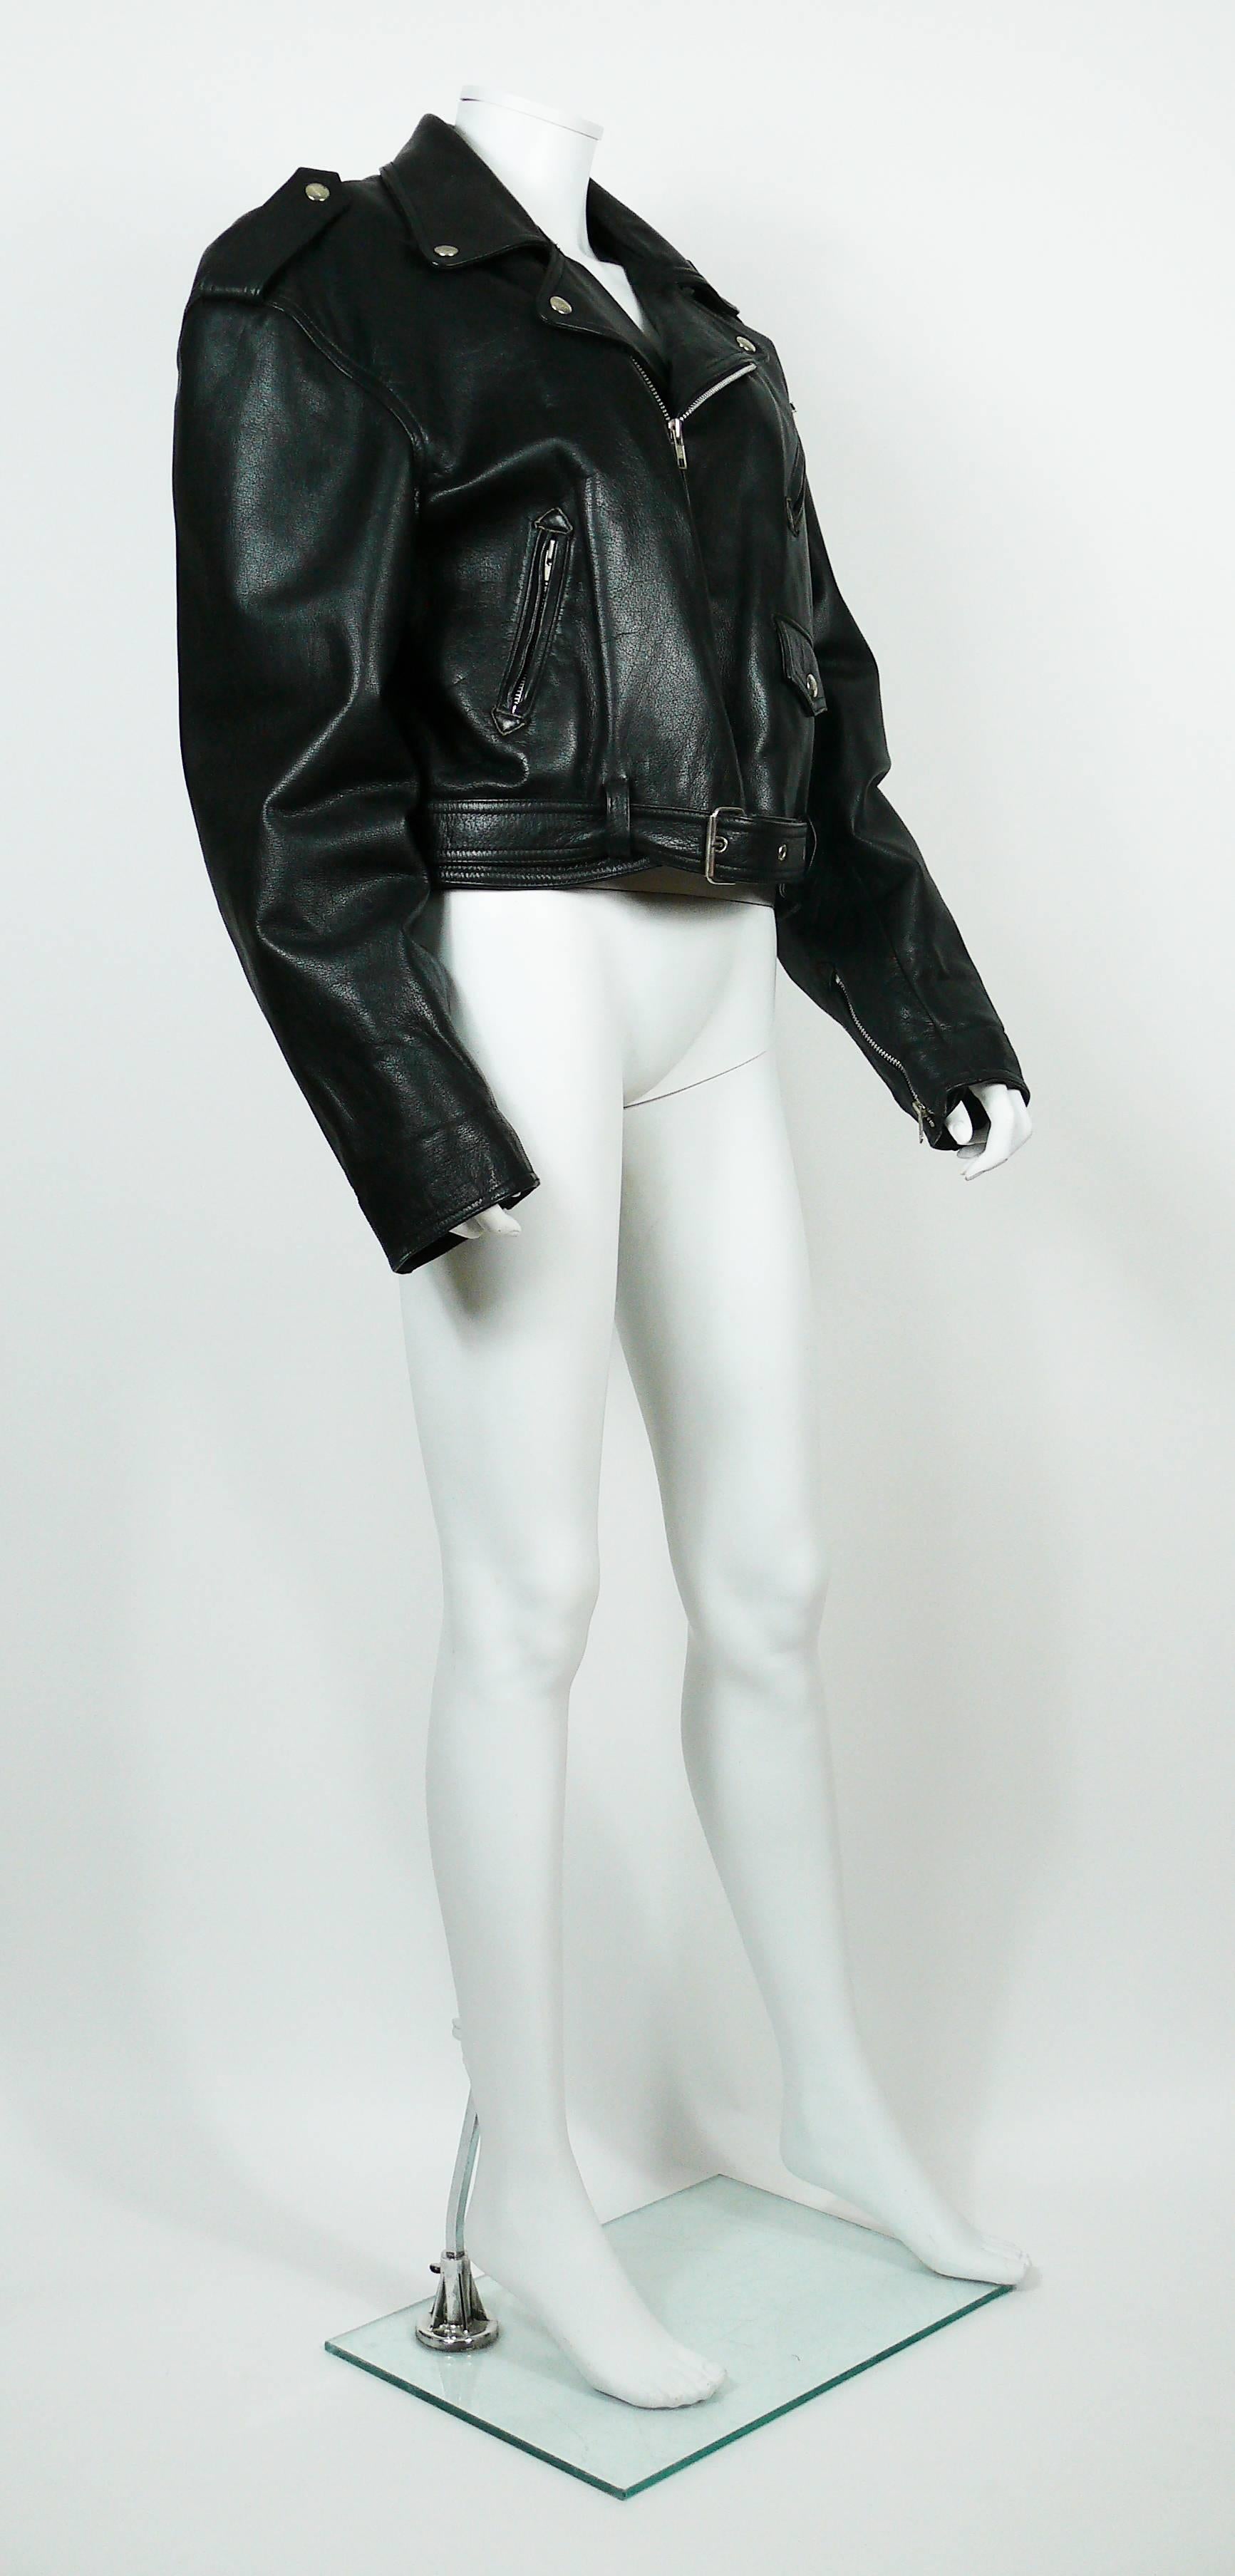 JEAN PAUL GAULTIER vintage black leather perfecto biker jacket.

This jacket features :
- Lapel collar.
- Long sleeves.
- Diagonal zip closing.
- Silver toned snap buttons embossed 